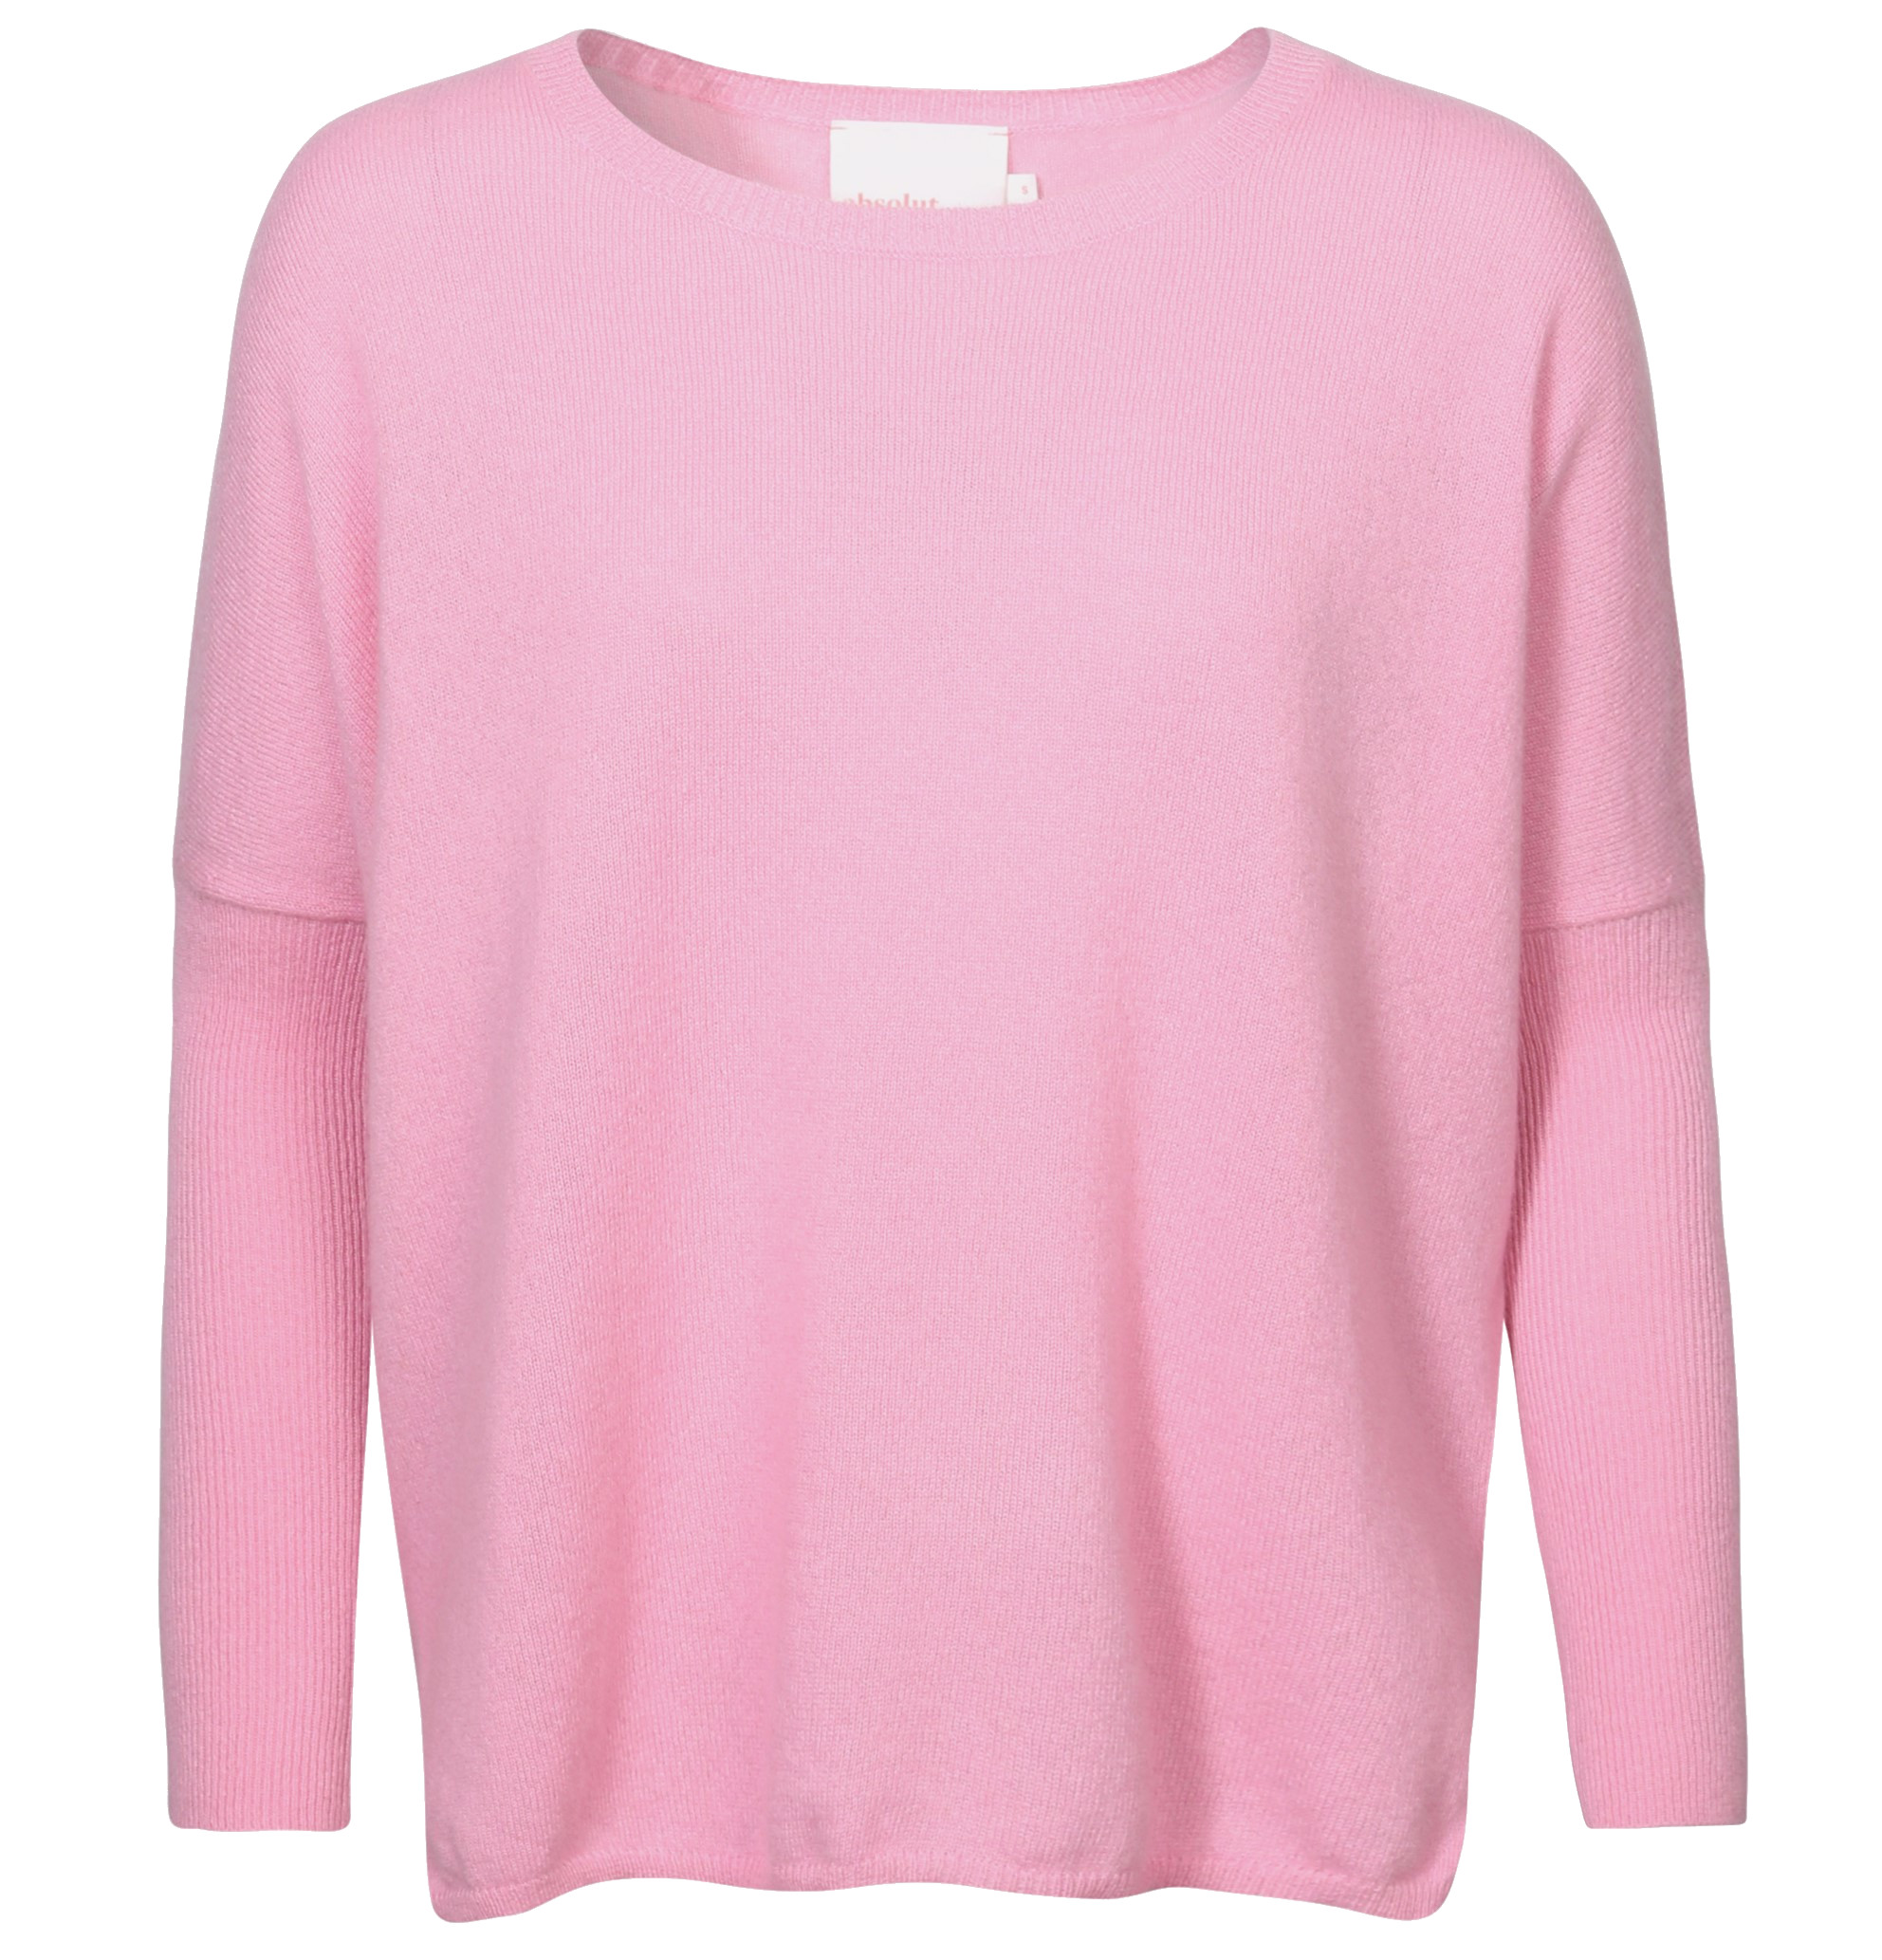 ABSOLUT CASHMERE Poncho Sweater Astrid in Light Pink